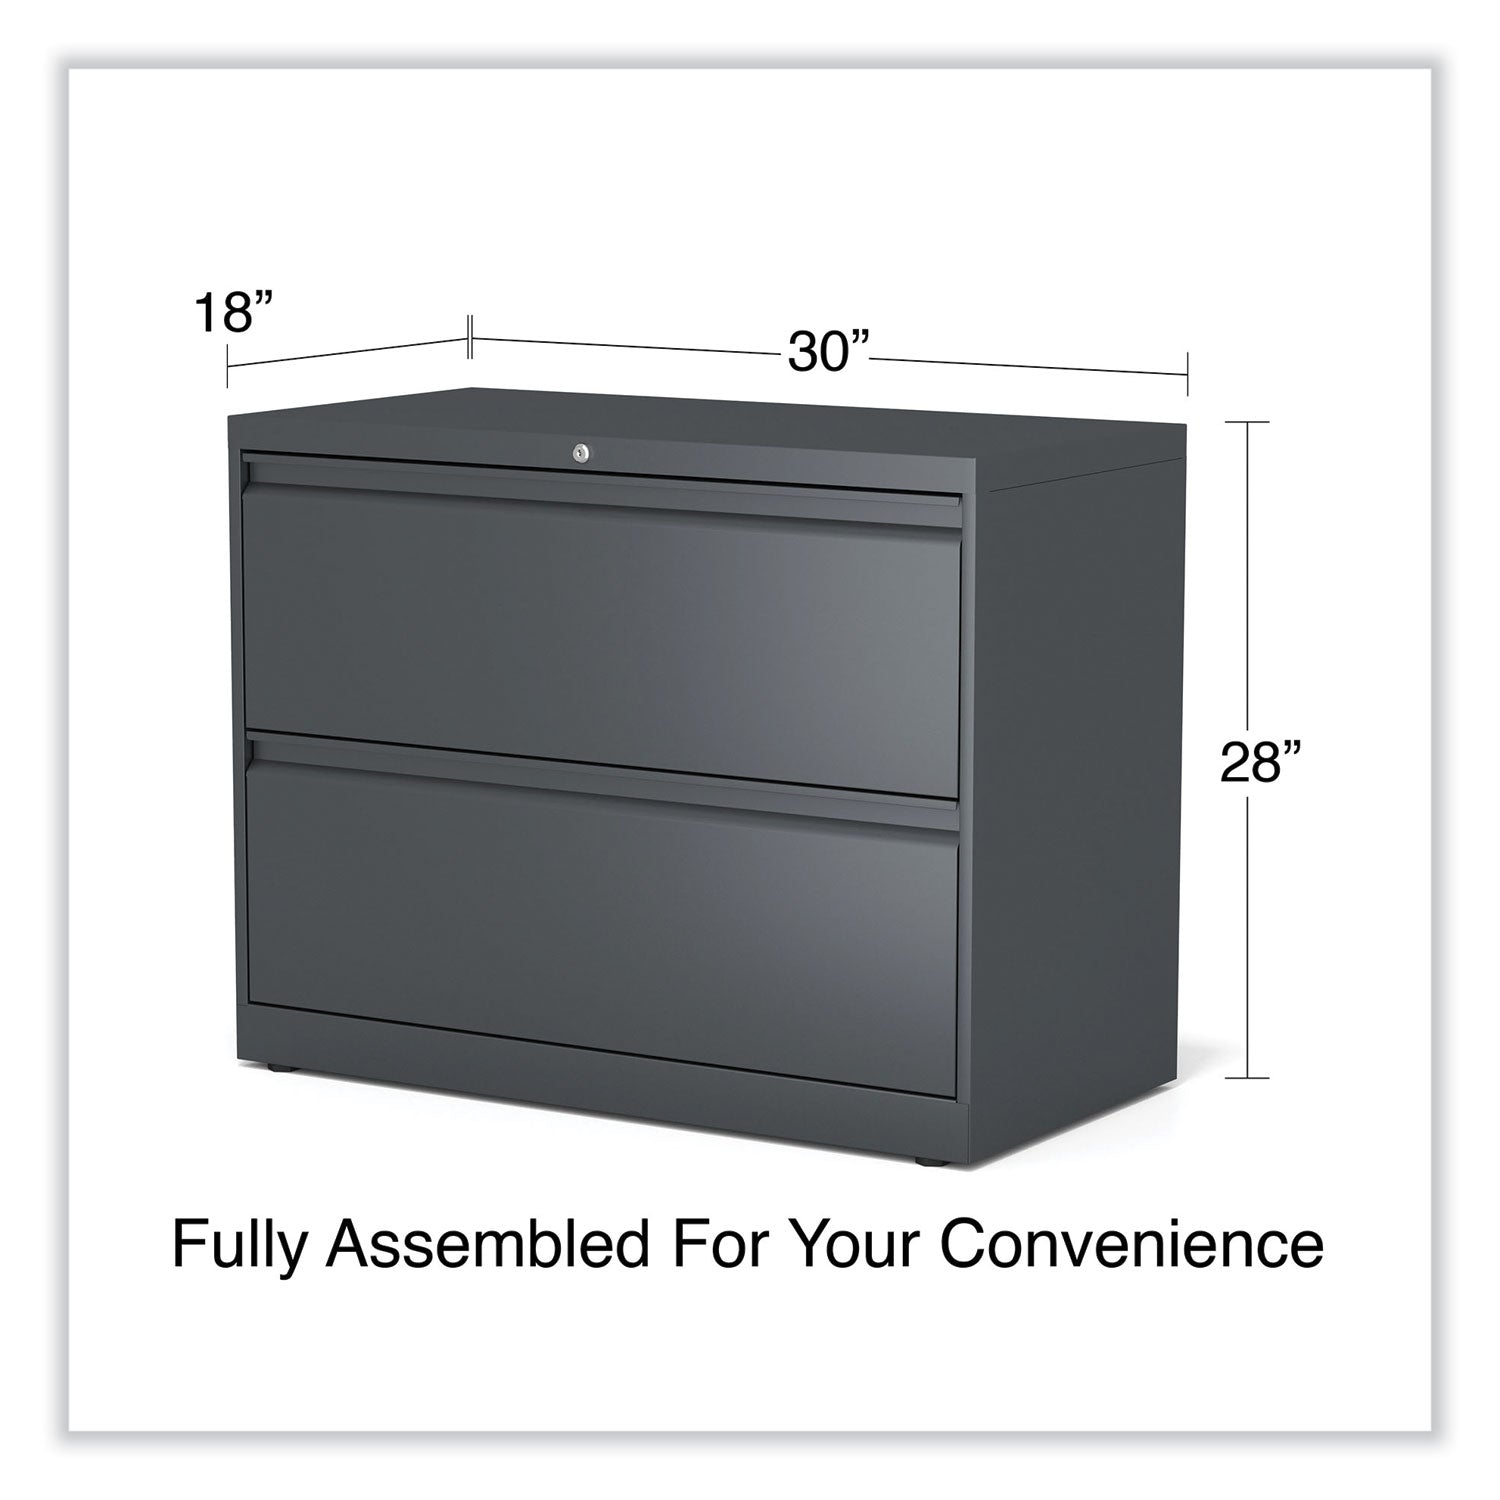 lateral-file-2-legal-letter-a4-a5-size-file-drawers-charcoal-36-x-1863-x-28_alehlf3629cc - 6